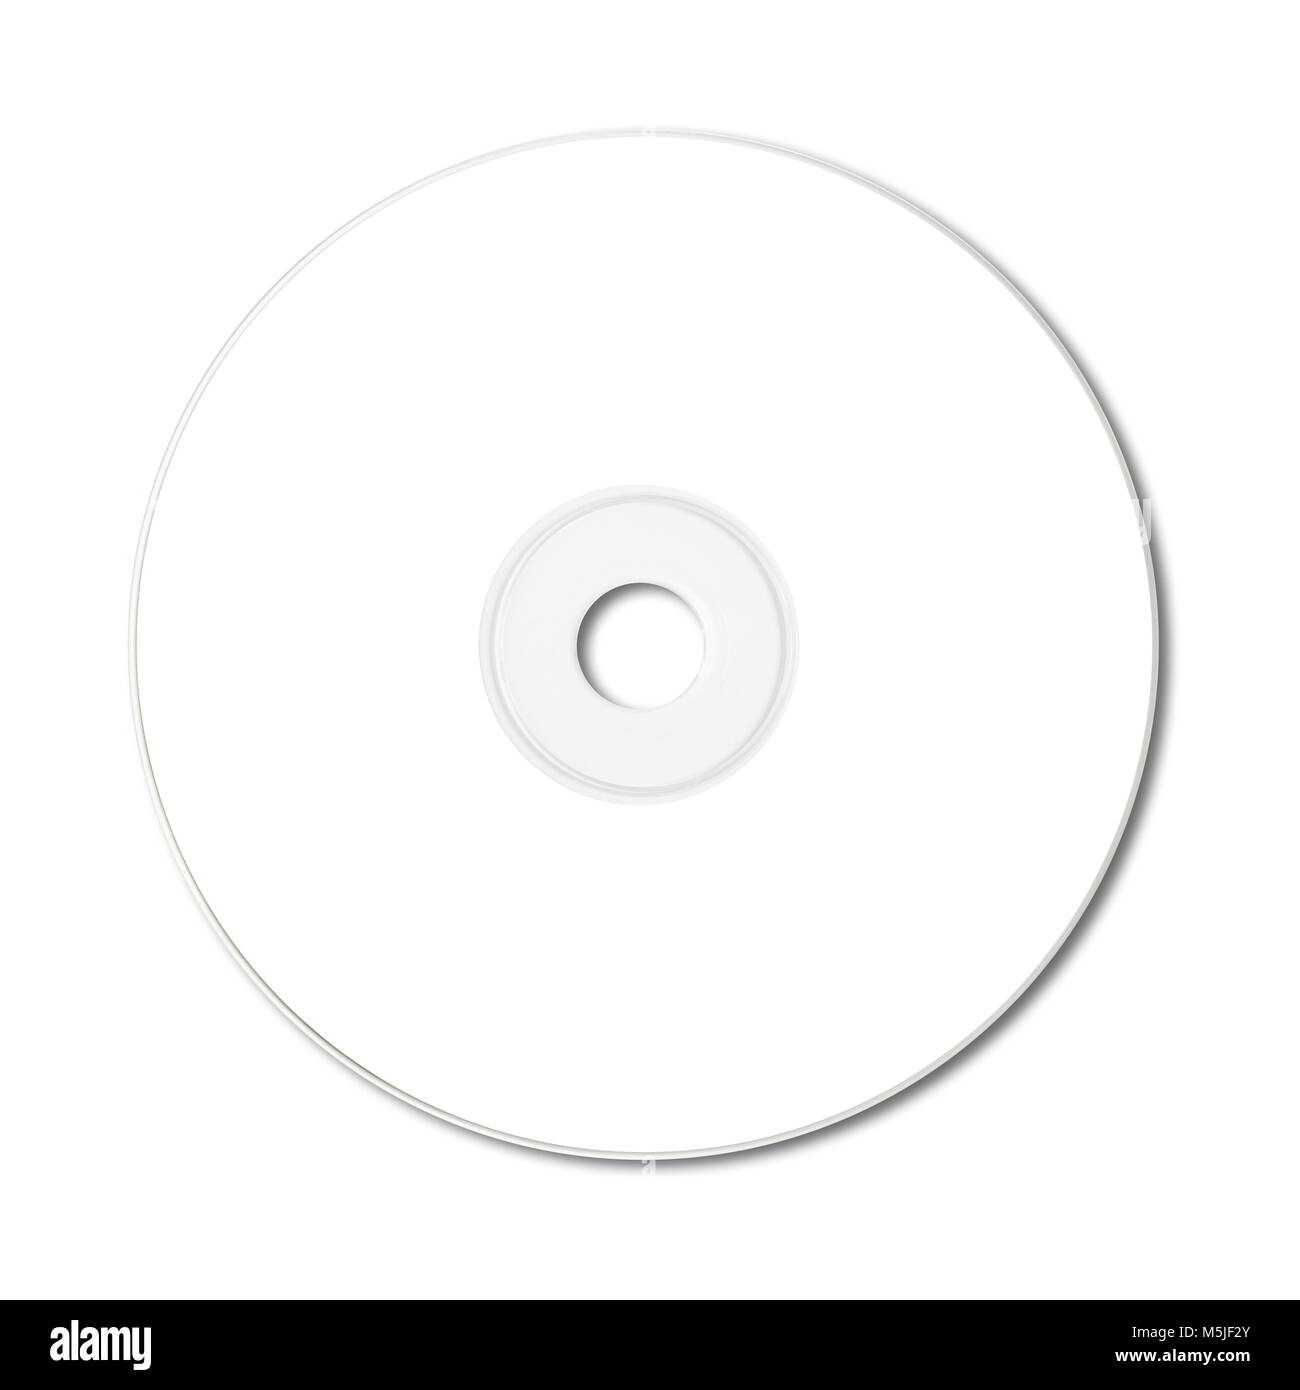 White CD - DVD label mockup template isolated Stock Photo - Alamy